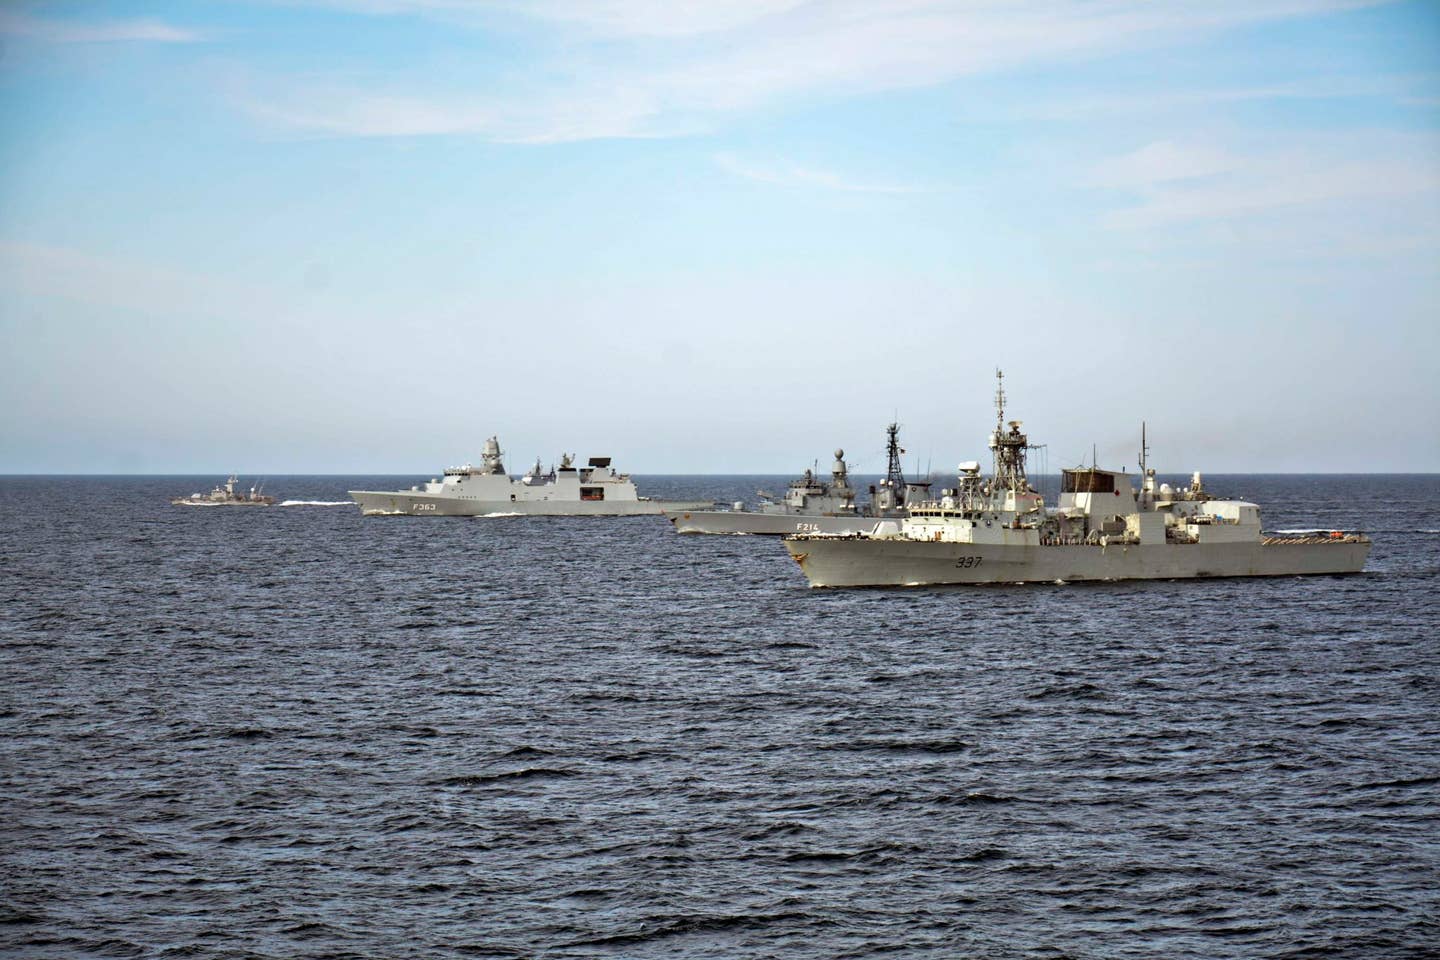 Allied and partner nation ships, including HDMS Nils Juel, an Iver Huitfeldt-class guided missile frigate (second from left), participate in close-quarters ship maneuvering drills during exercise Baltic Operations (BALTOPS) 2015. (U.S. Navy photo by Mass Communication Specialist 2nd Class Amanda S. Kitchner)